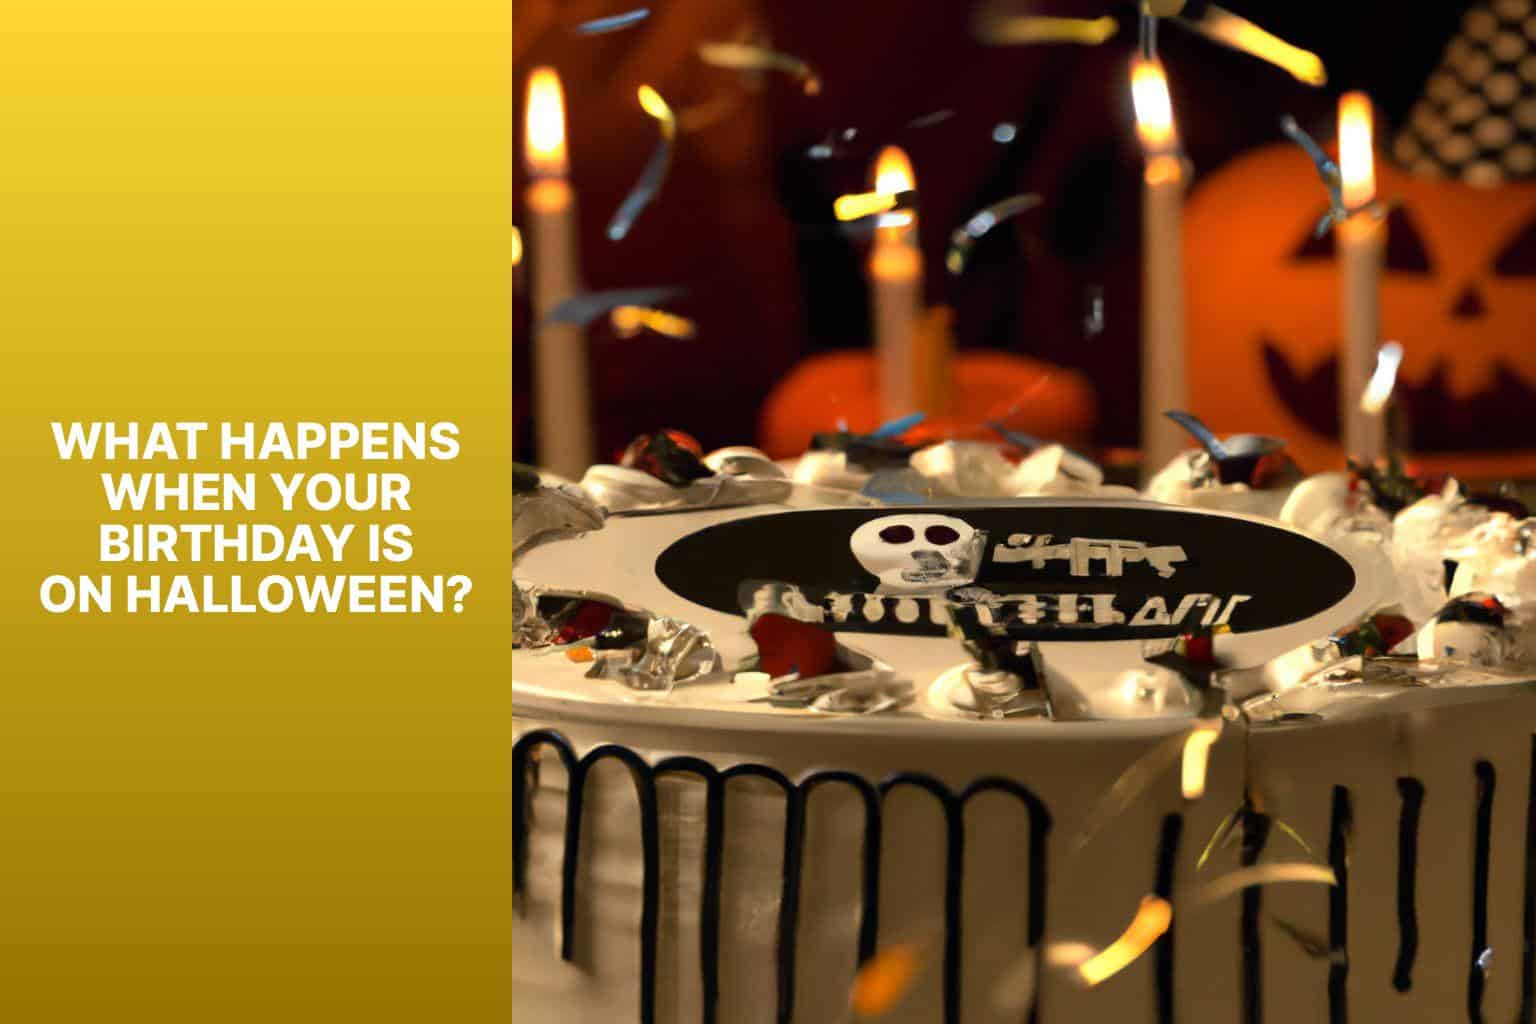 What Happens When Your Birthday is on Halloween? - what happens when your birthday is on halloween 